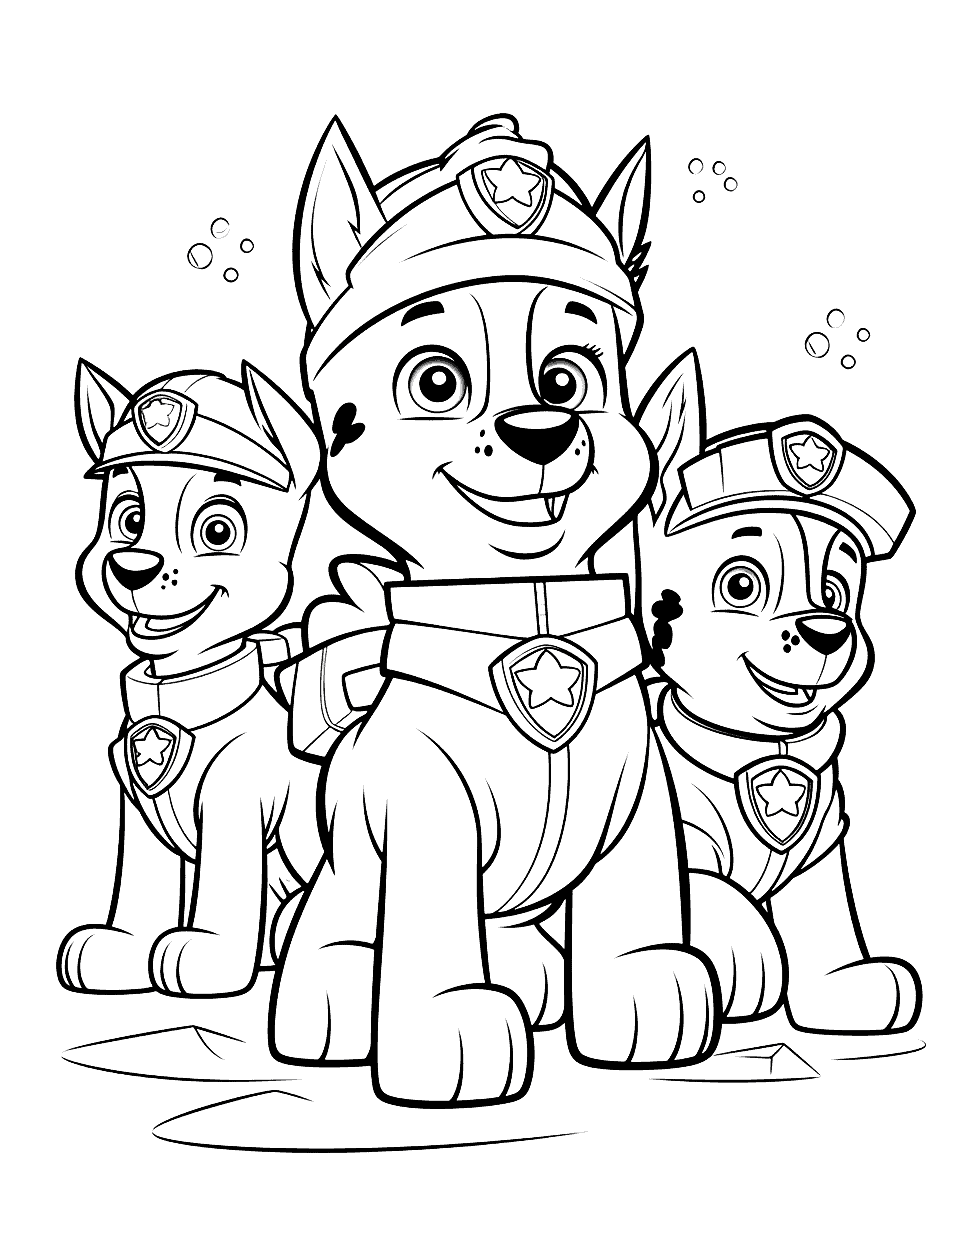 Paw Patrol's Snow Rescue Winter Coloring Page - The Paw Patrol team embarking on a rescue mission in the snow.